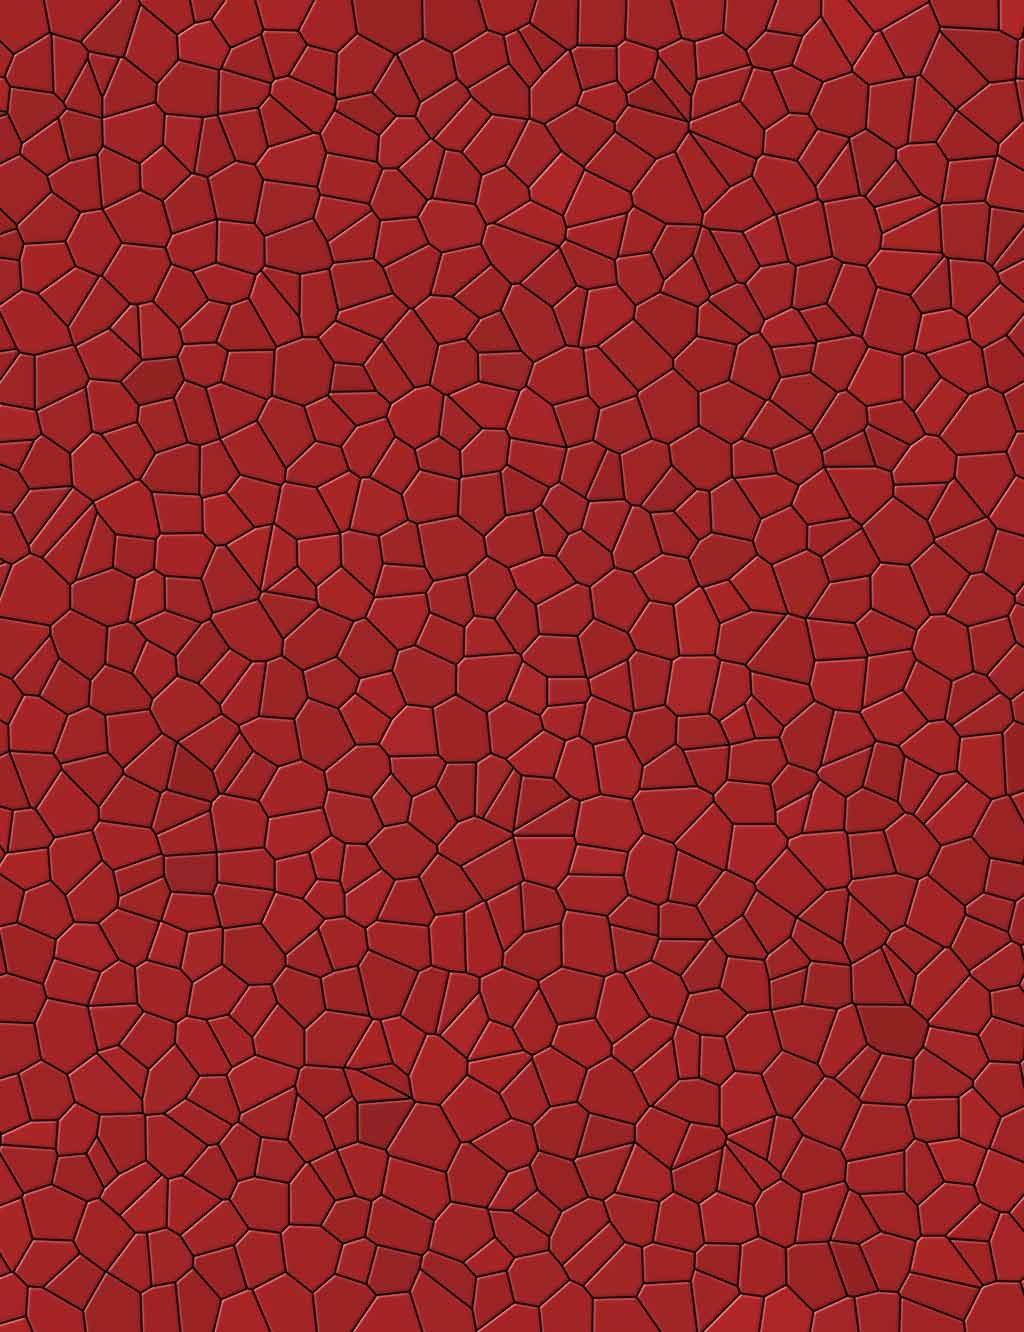 Red Small Pieces Texture Photography Backdrop Shopbackdrop